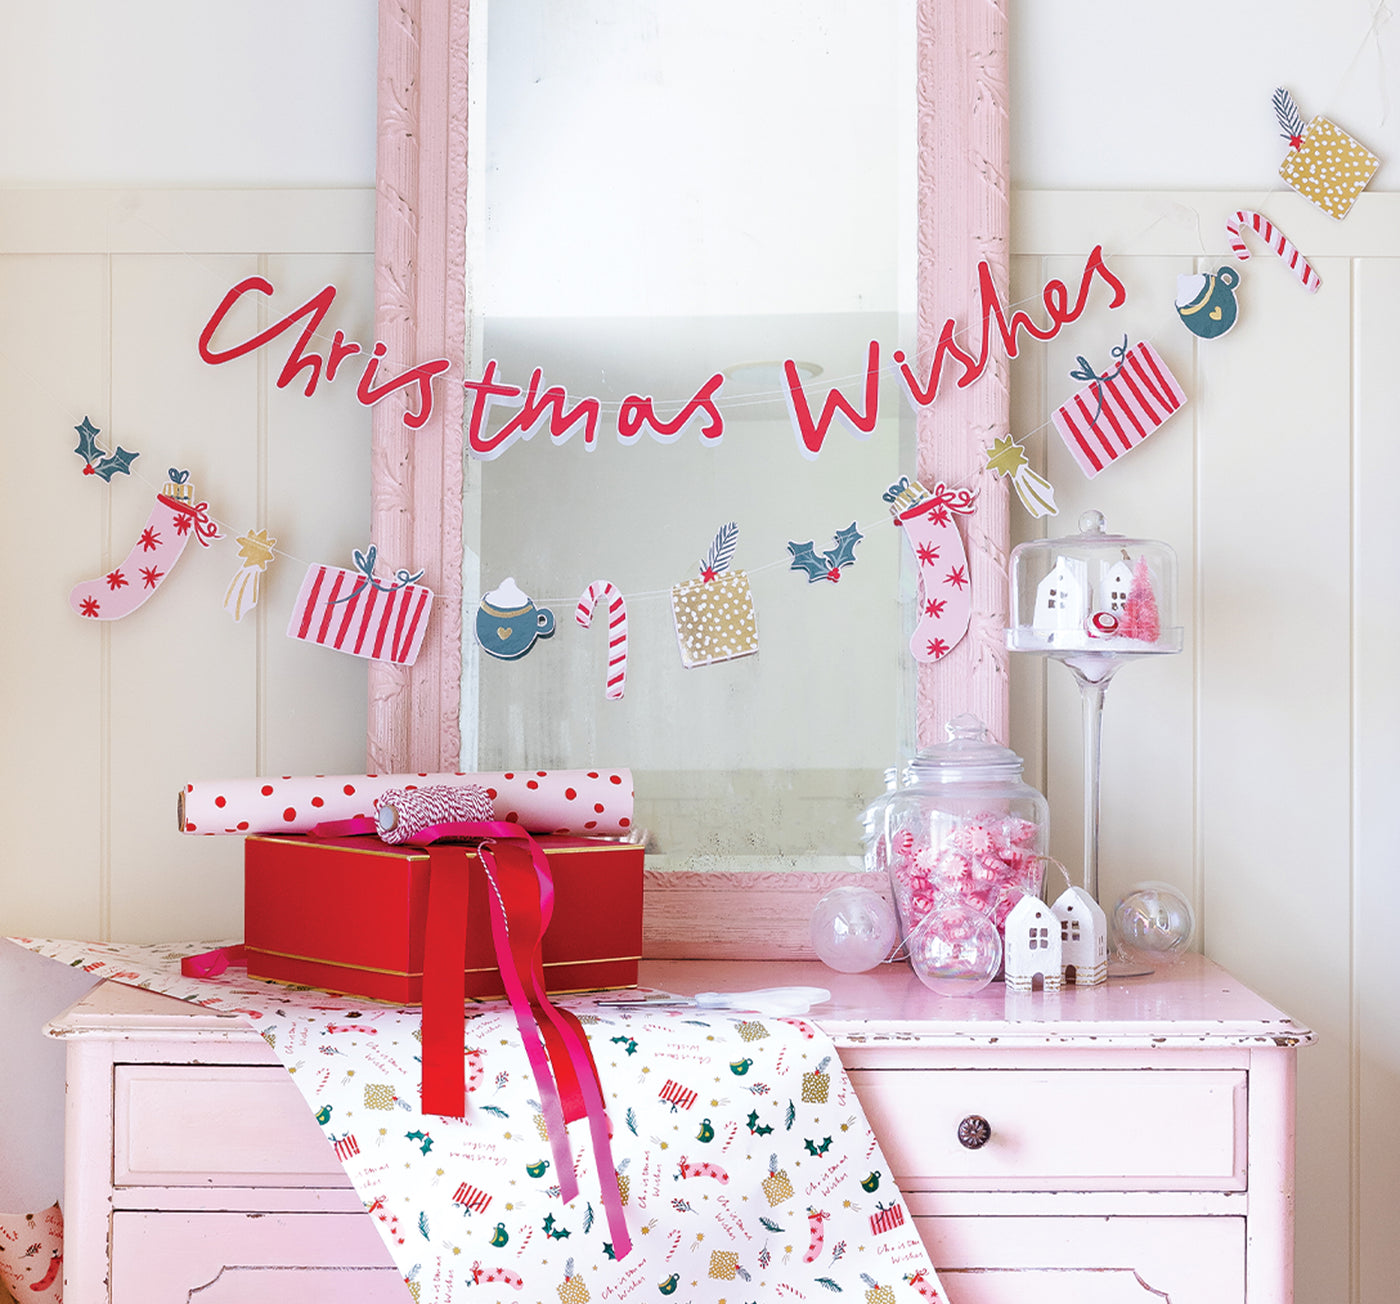 CHW902 - Christmas Wishes Banner